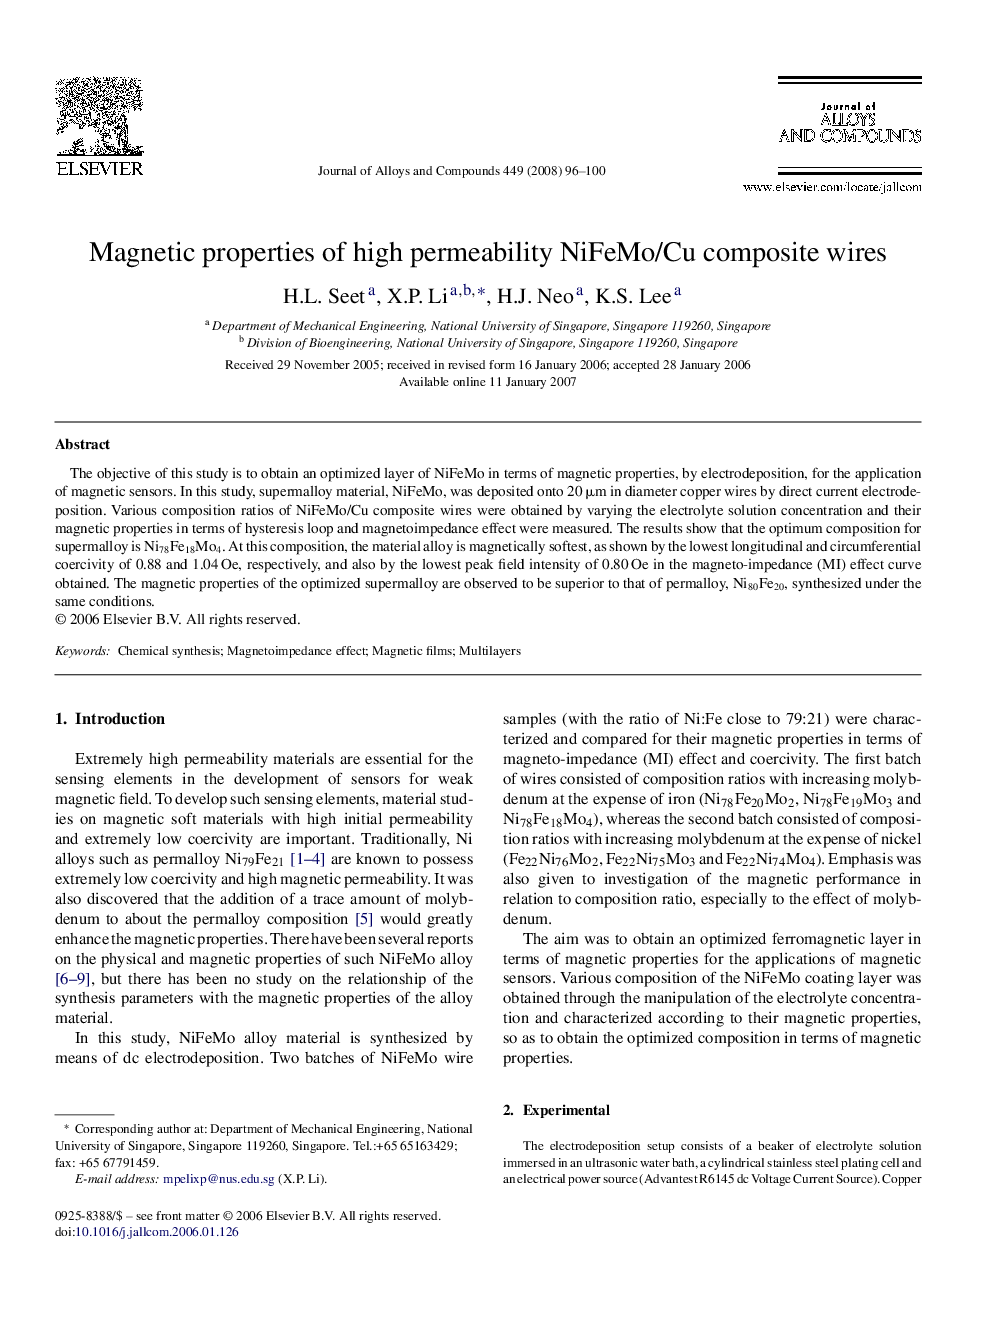 Magnetic properties of high permeability NiFeMo/Cu composite wires